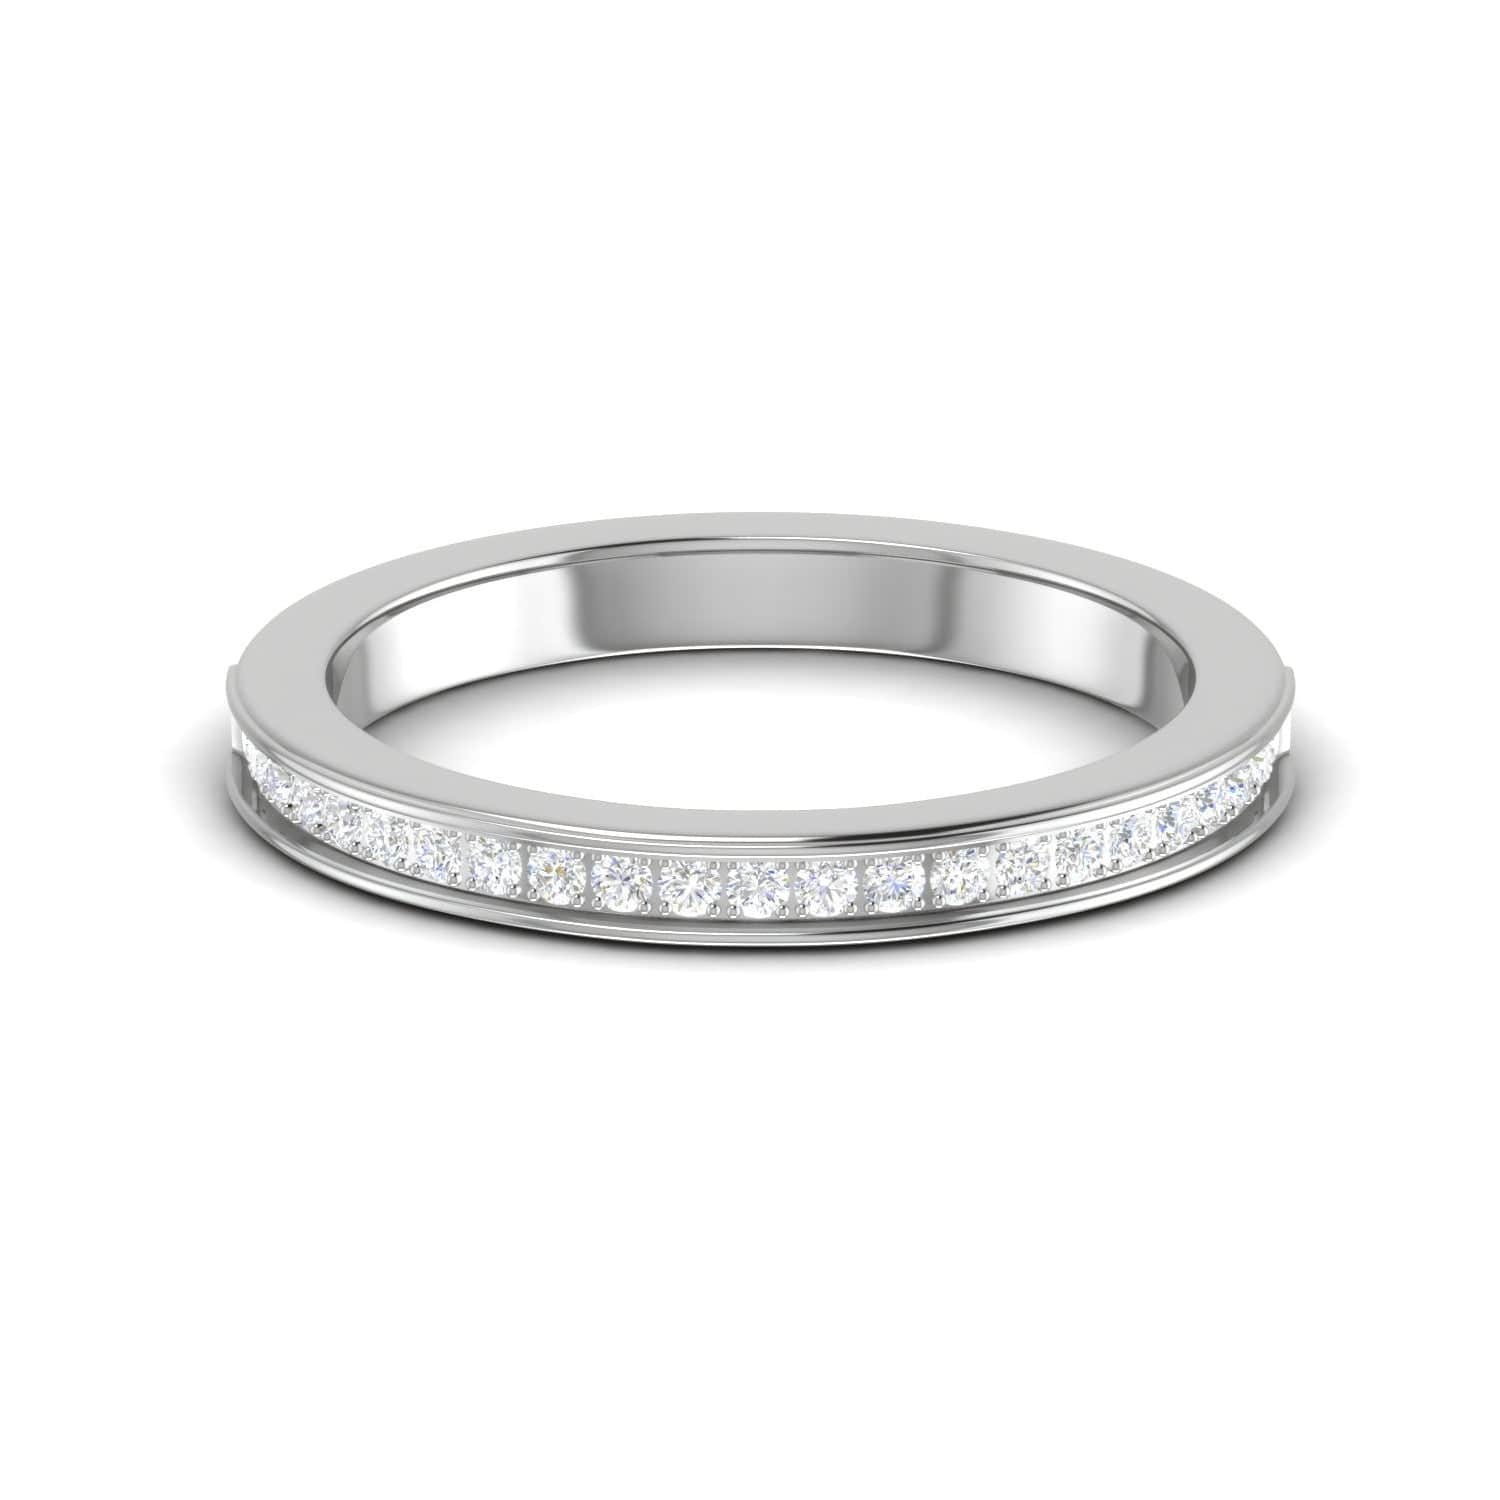 The Clasped Band for Her | BlueStone.com